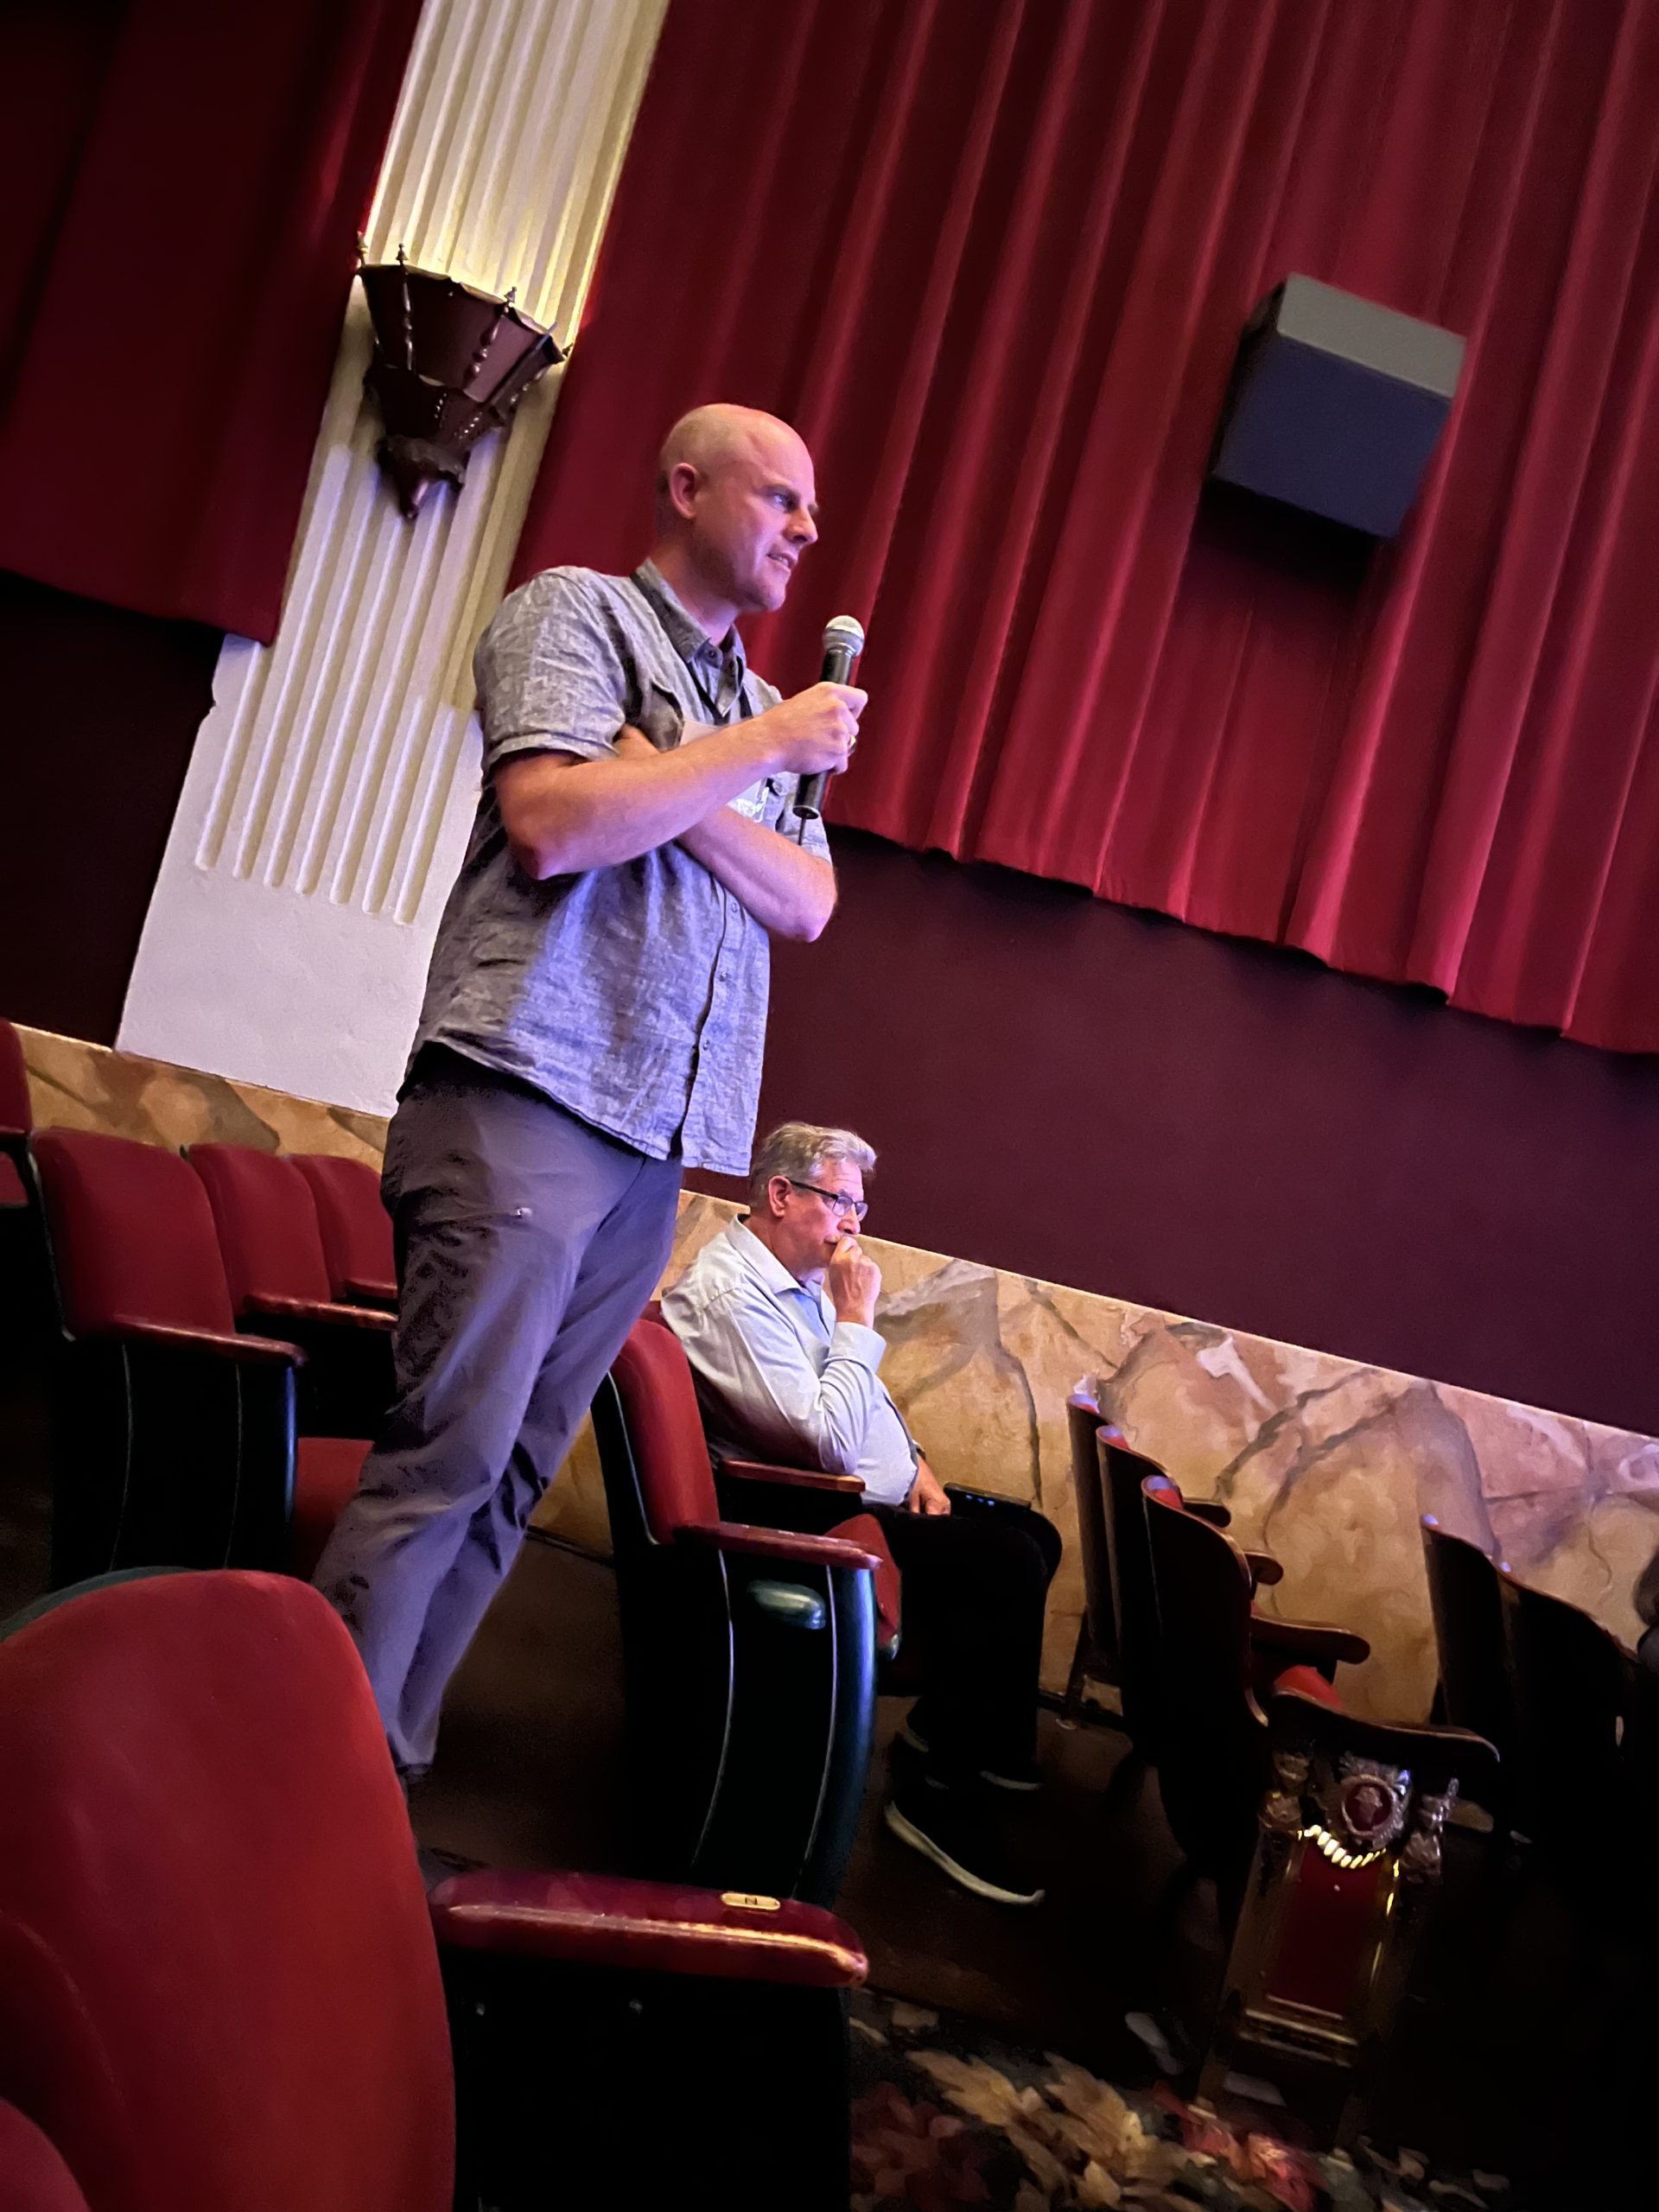 Elemental's director Ralph Bloemers fielding questions after the screening of his new documentary film Elemental